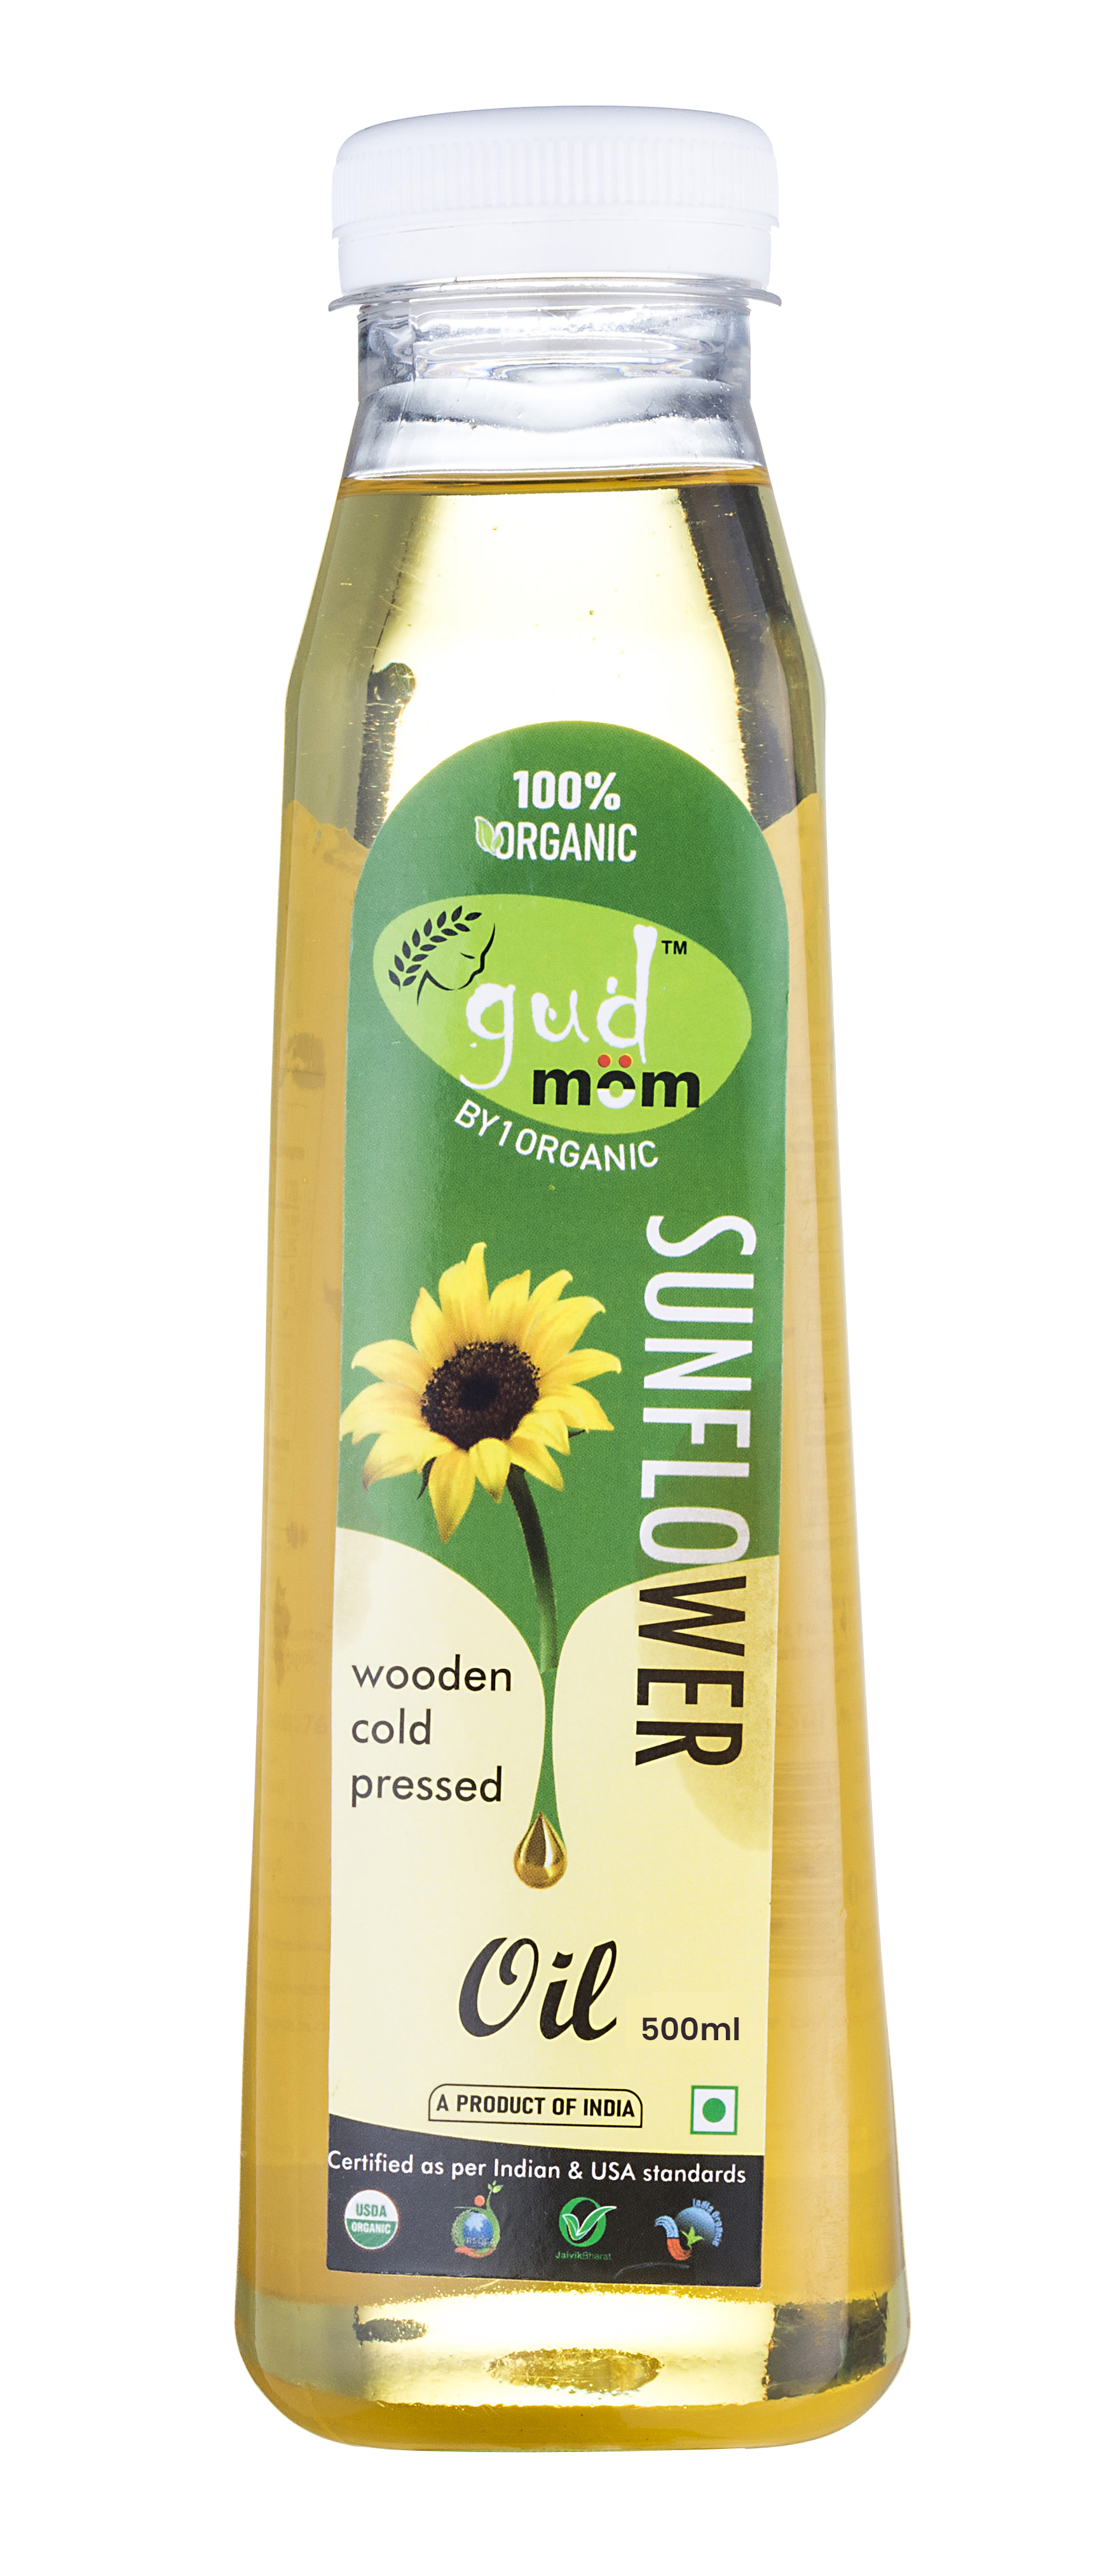 Buy Milanaise Organic Sunflower Hull 500 g with same day delivery